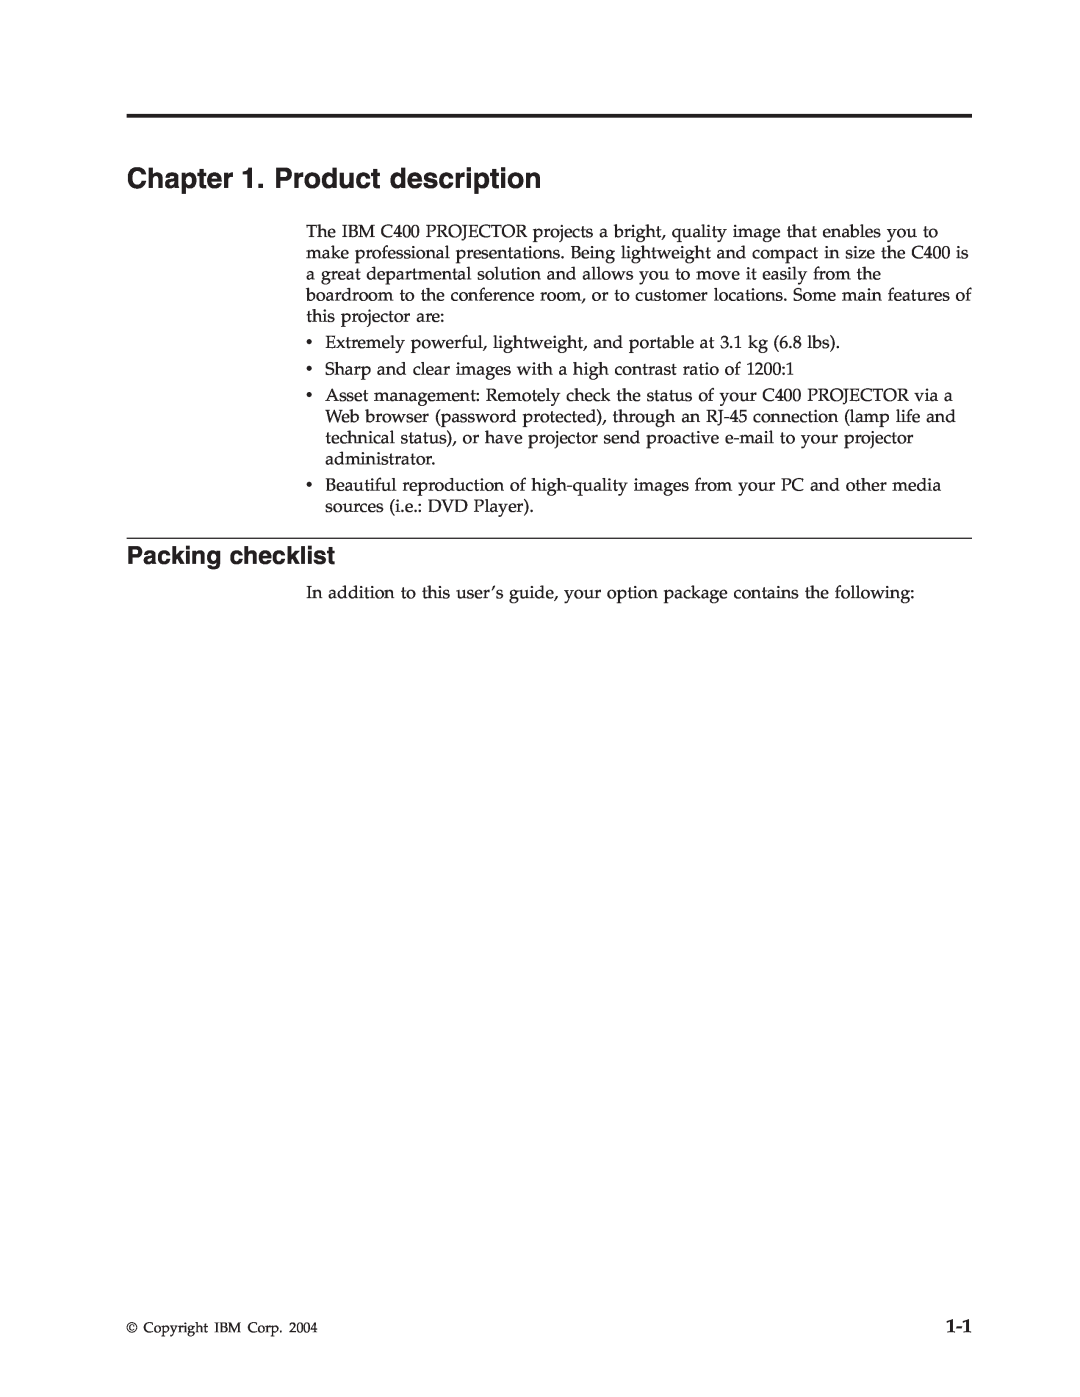 IBM PROJECTOR C400 manual Product description, Packing checklist 